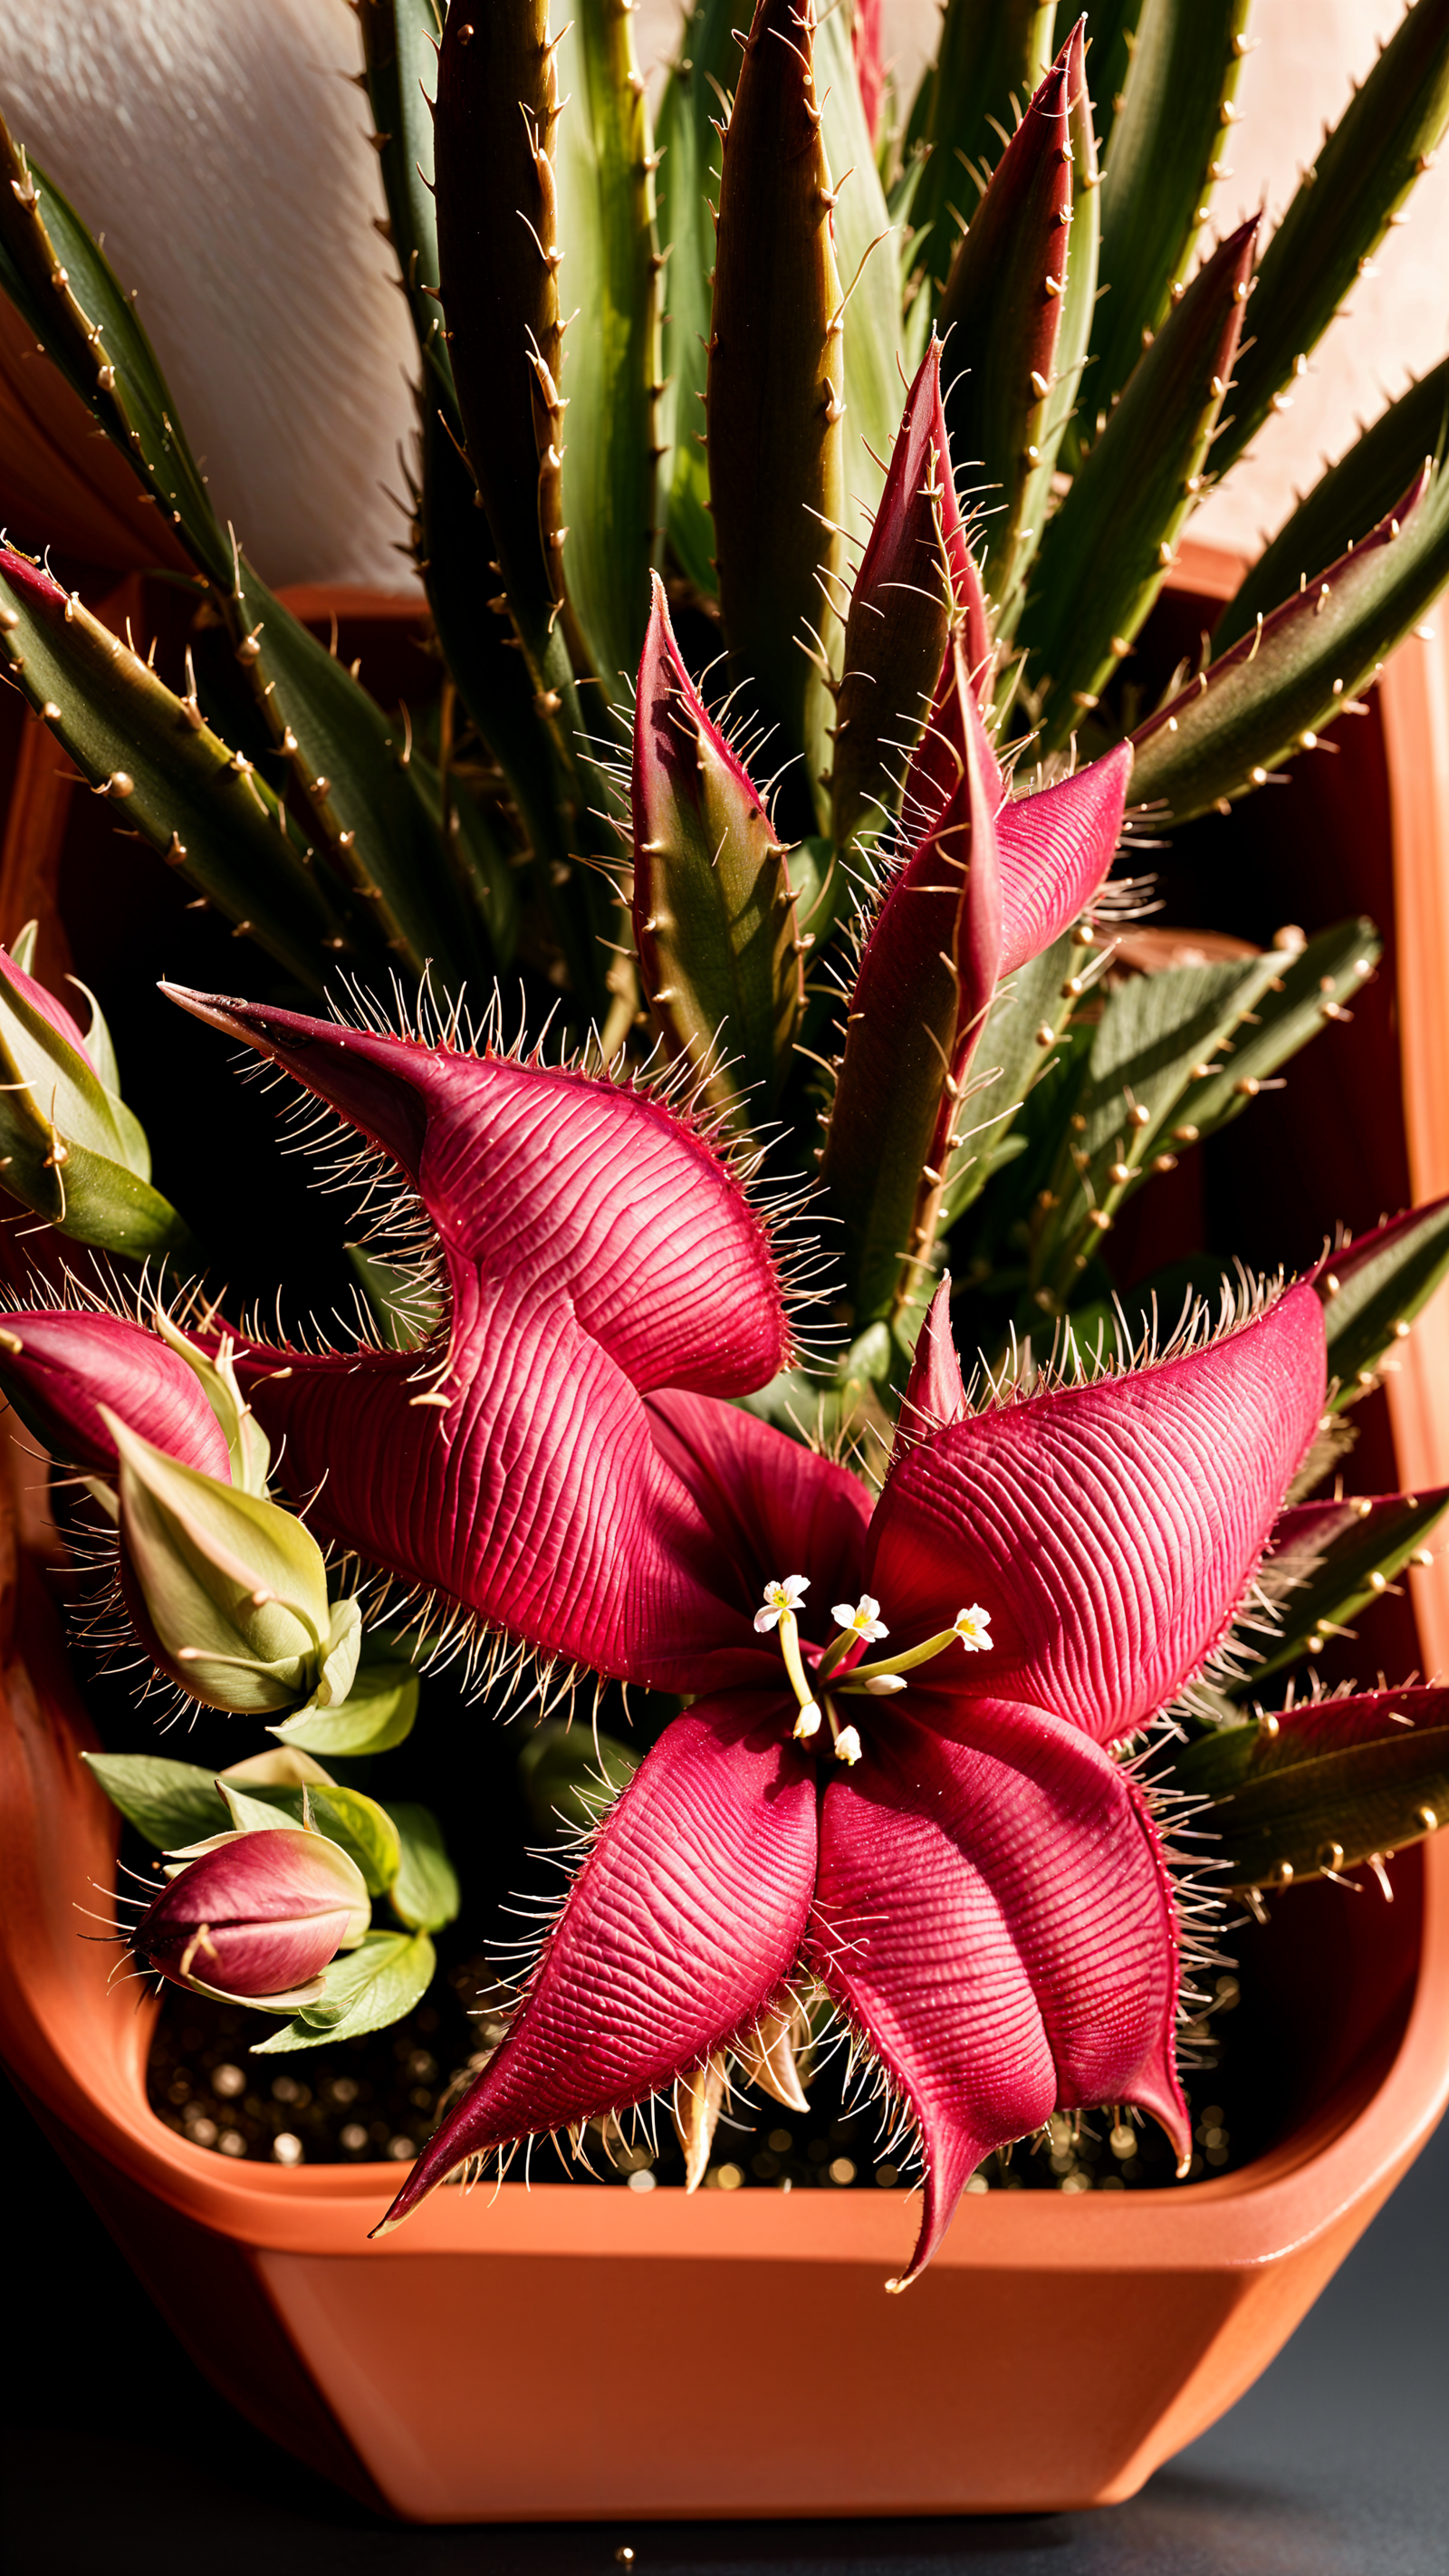 Stapelia hirsuta plant with flower in a planter, displayed indoors under clear lighting.